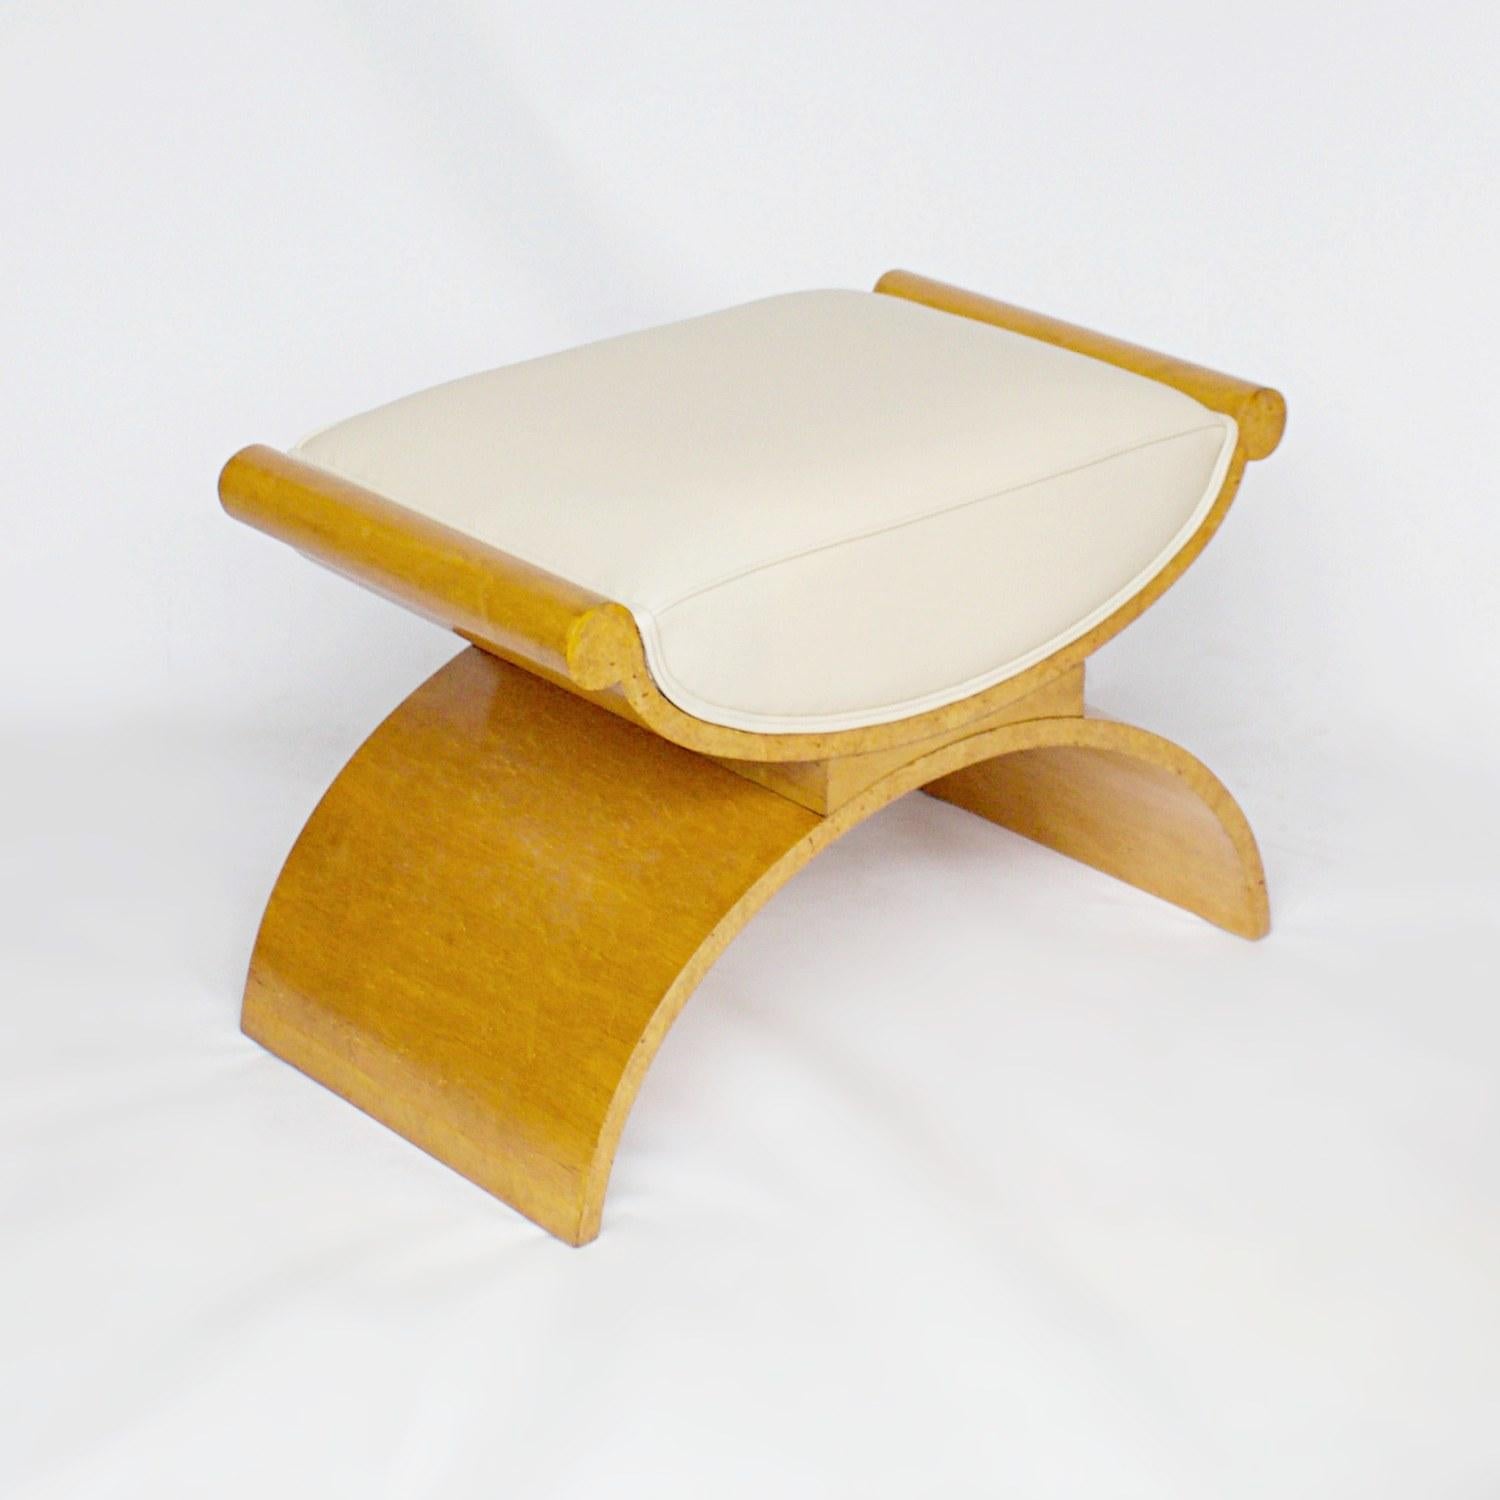 An Art Deco C-frame stool by Harry & Lou Epstein. Satin birch and bleached walnut veneered, upholstered in cream leather.

Dimensions: H 51cm, W 70cm, D 41cm, Seat H 49cm

Origin: English

Date: circa 1930

Item No: 1611201

All of our